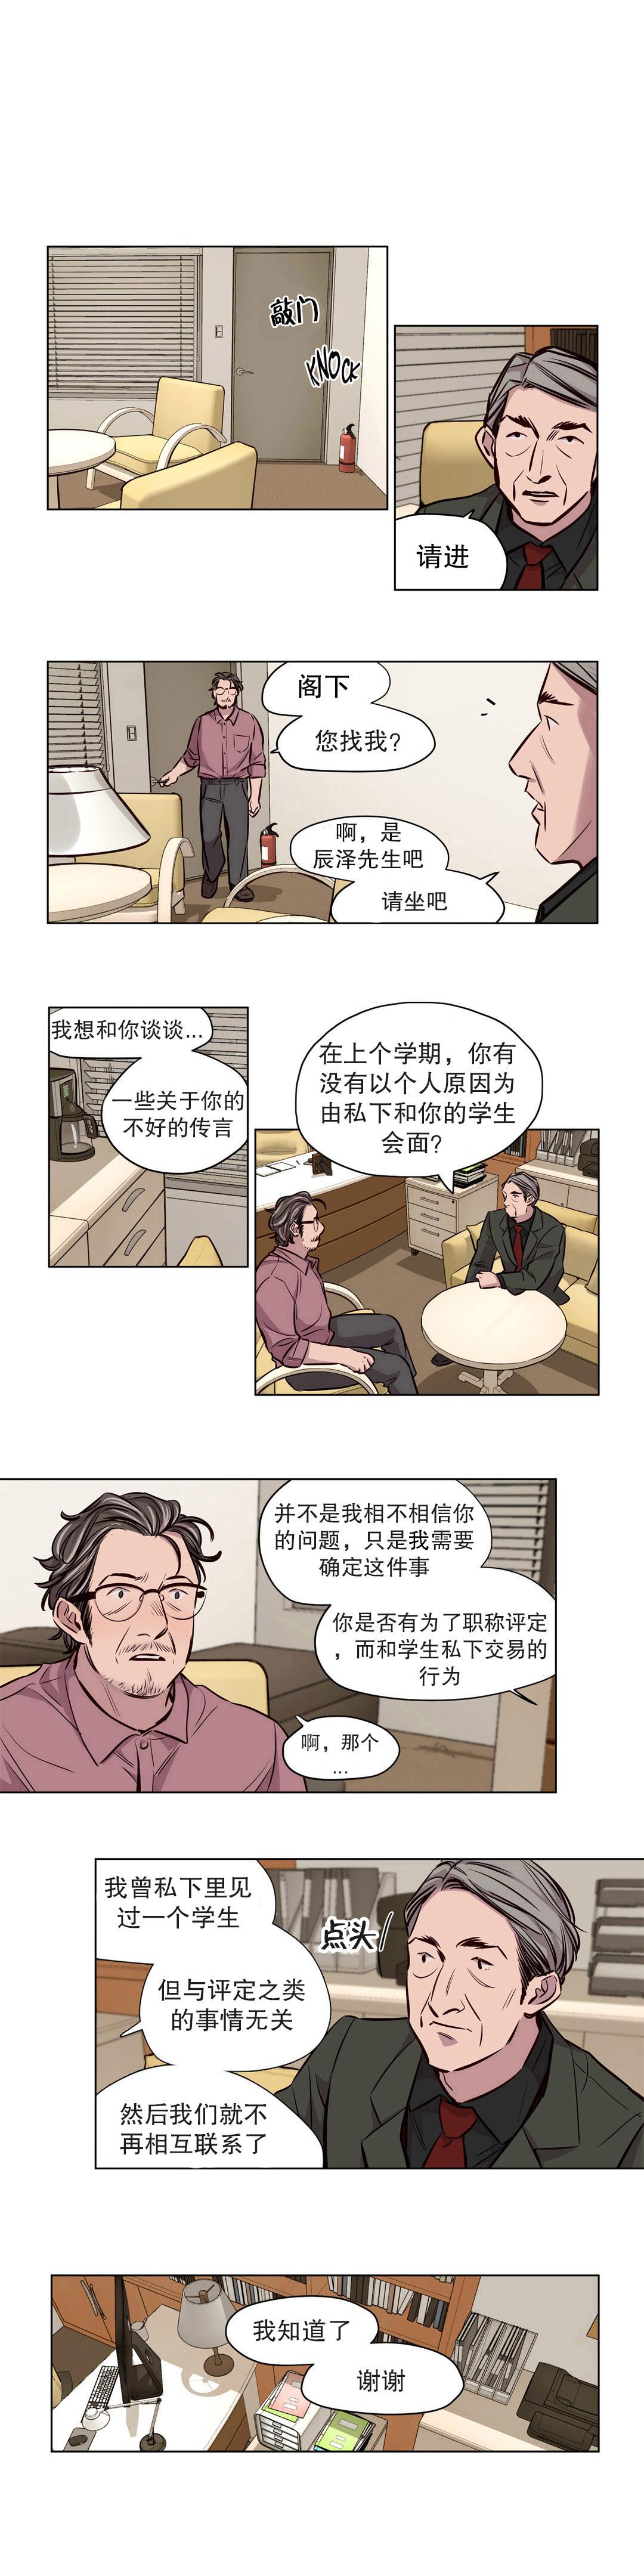 [Ramjak] 赎罪营(Atonement Camp) Ch.50-52 (Chinese) 4